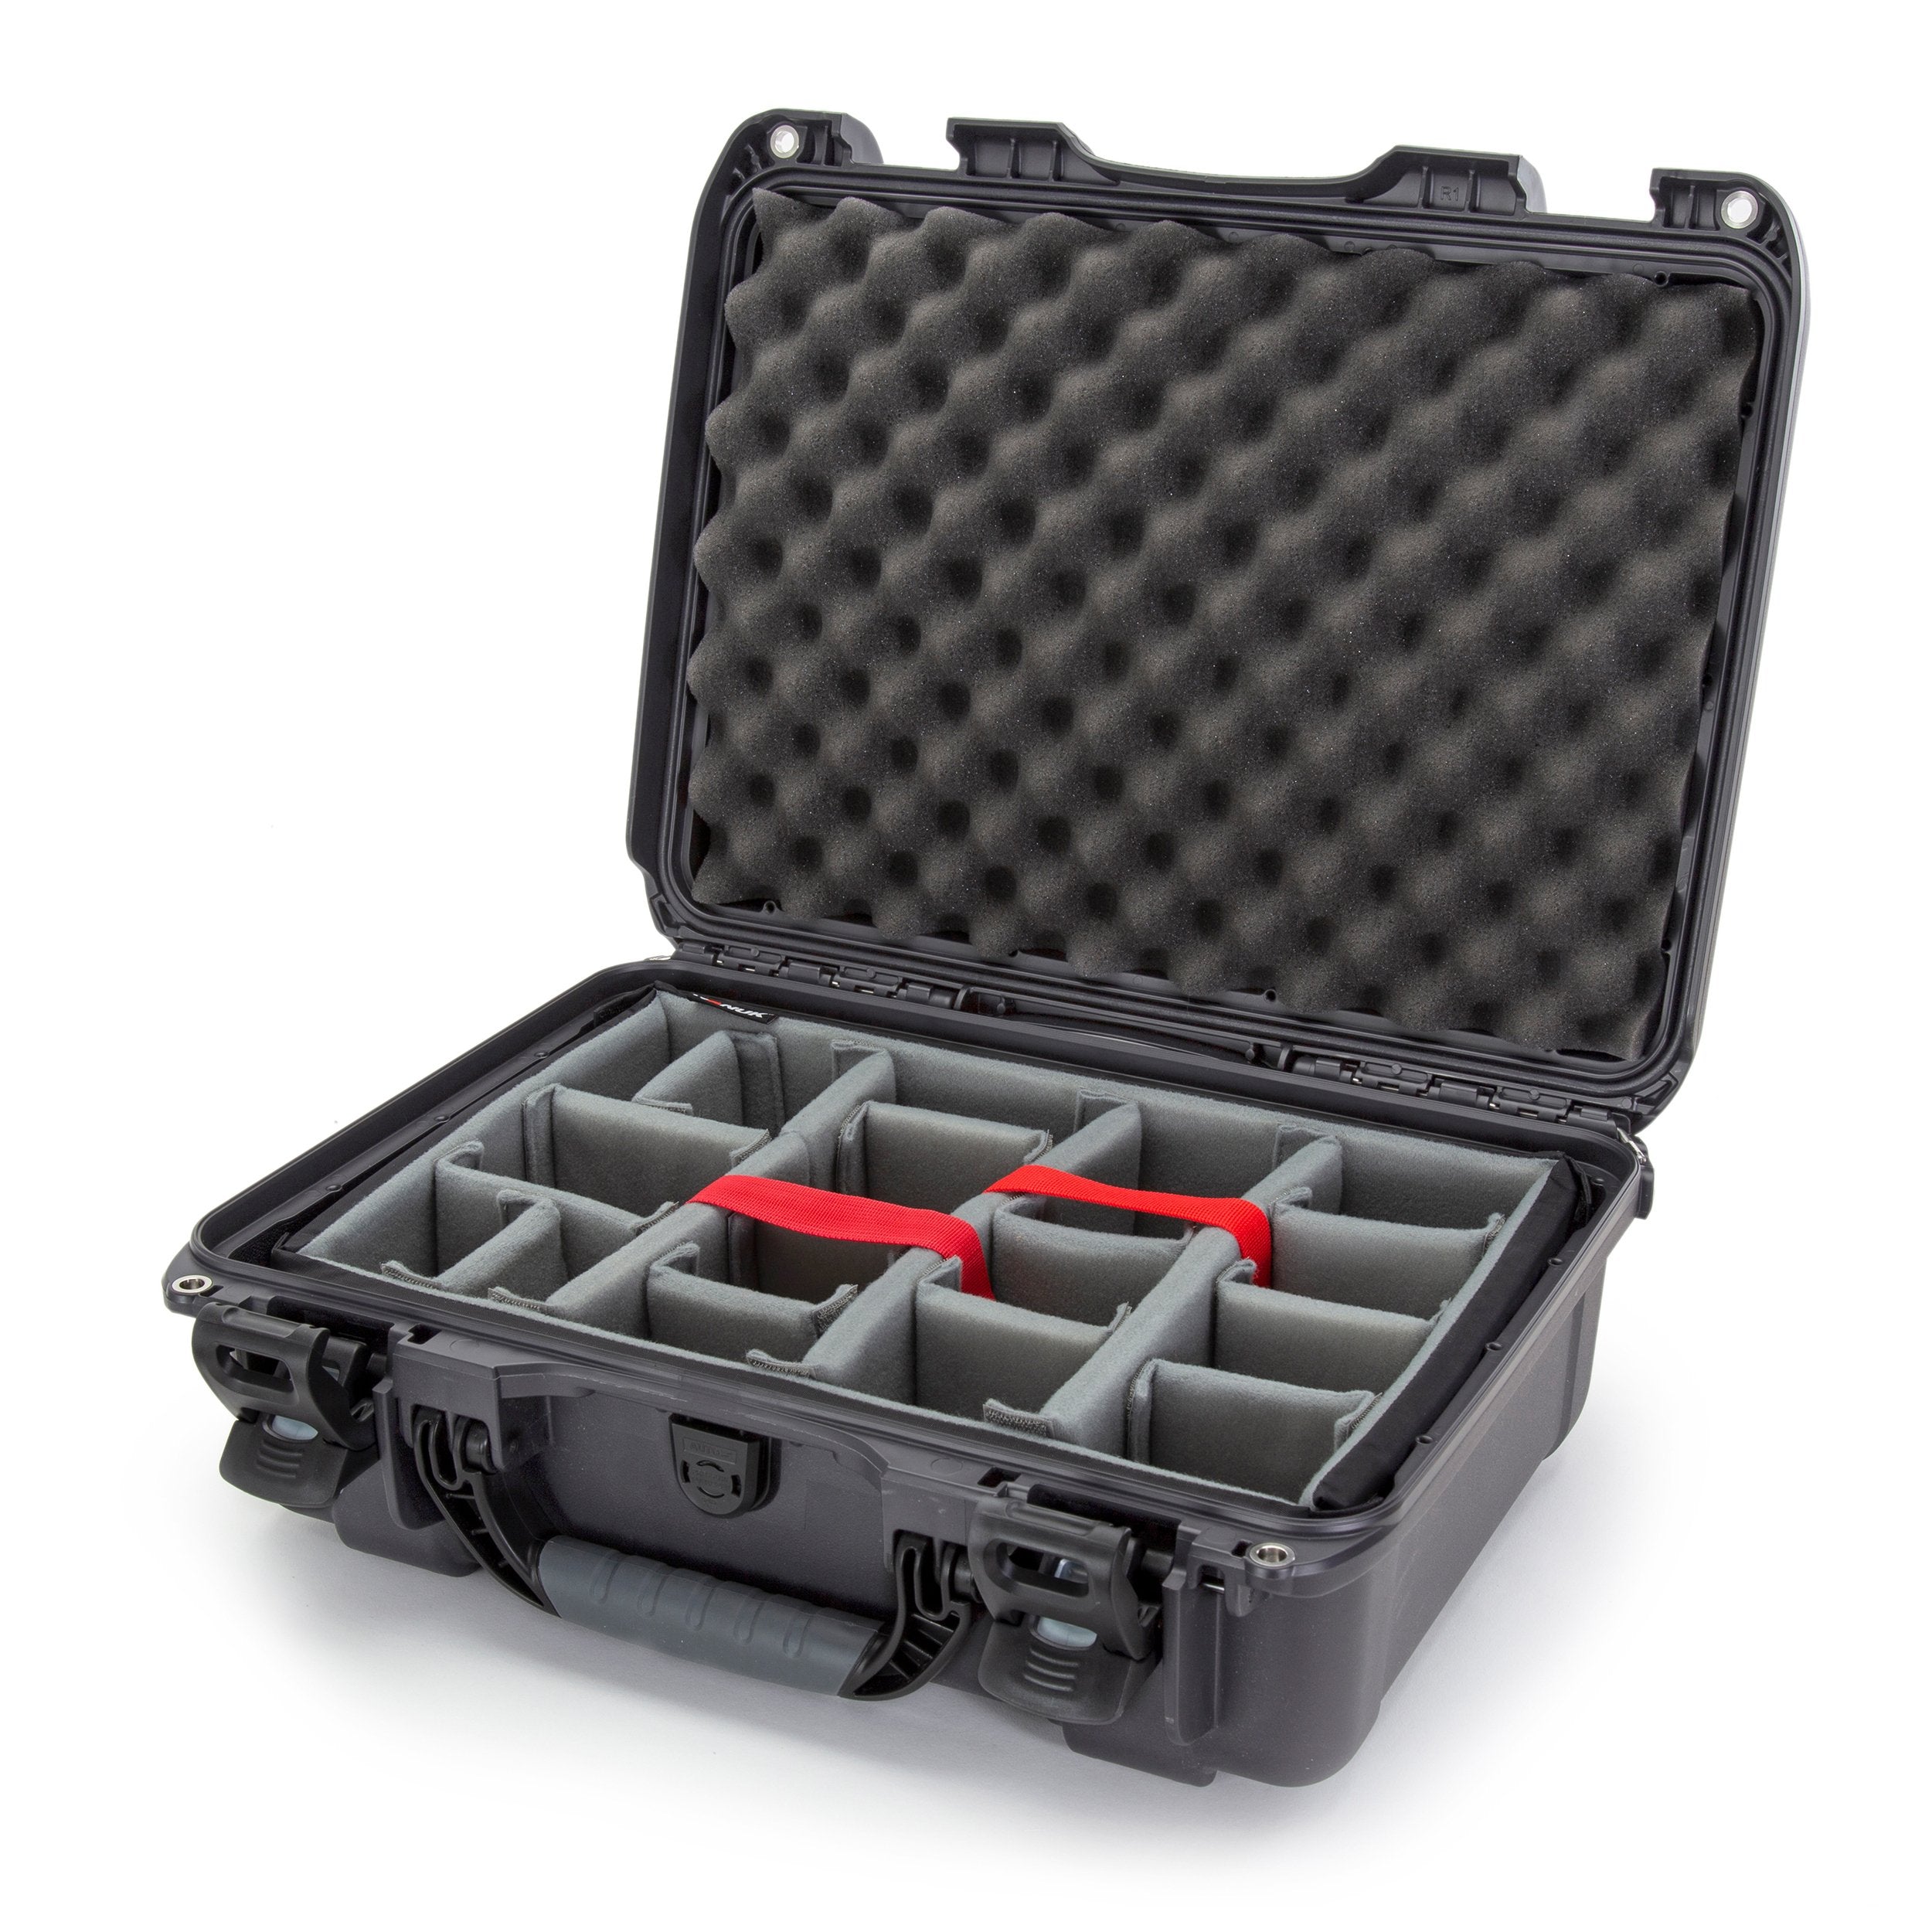 Nanuk 925 Waterproof Hard Case with Padded Dividers - Graphite